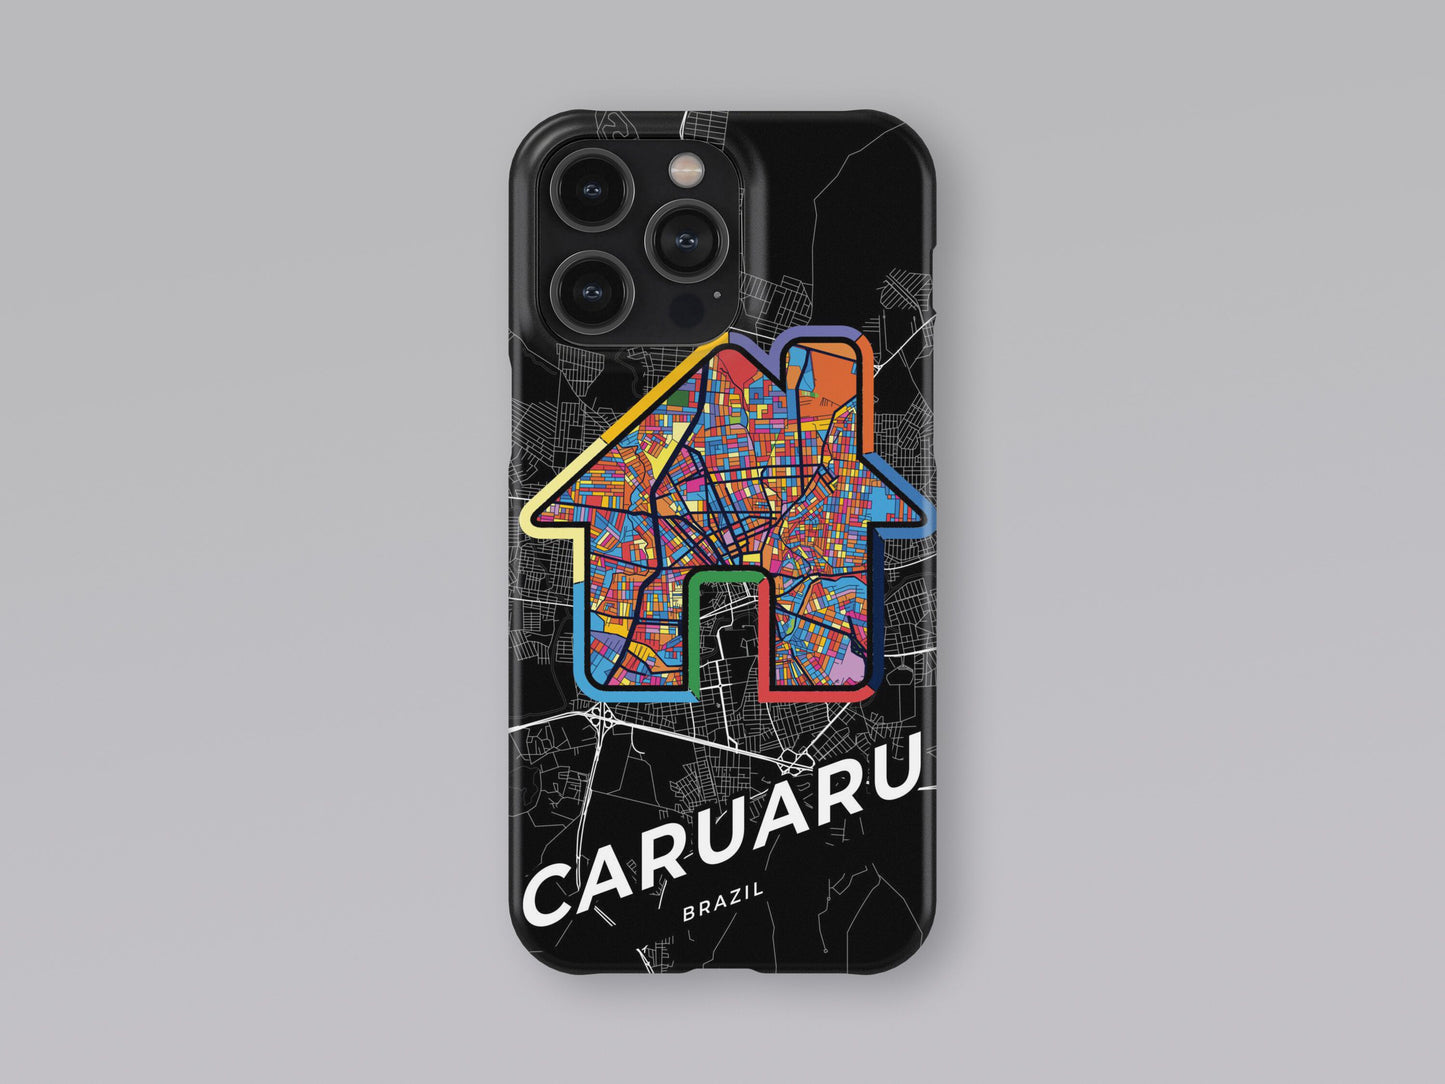 Caruaru Brazil slim phone case with colorful icon. Birthday, wedding or housewarming gift. Couple match cases. 3